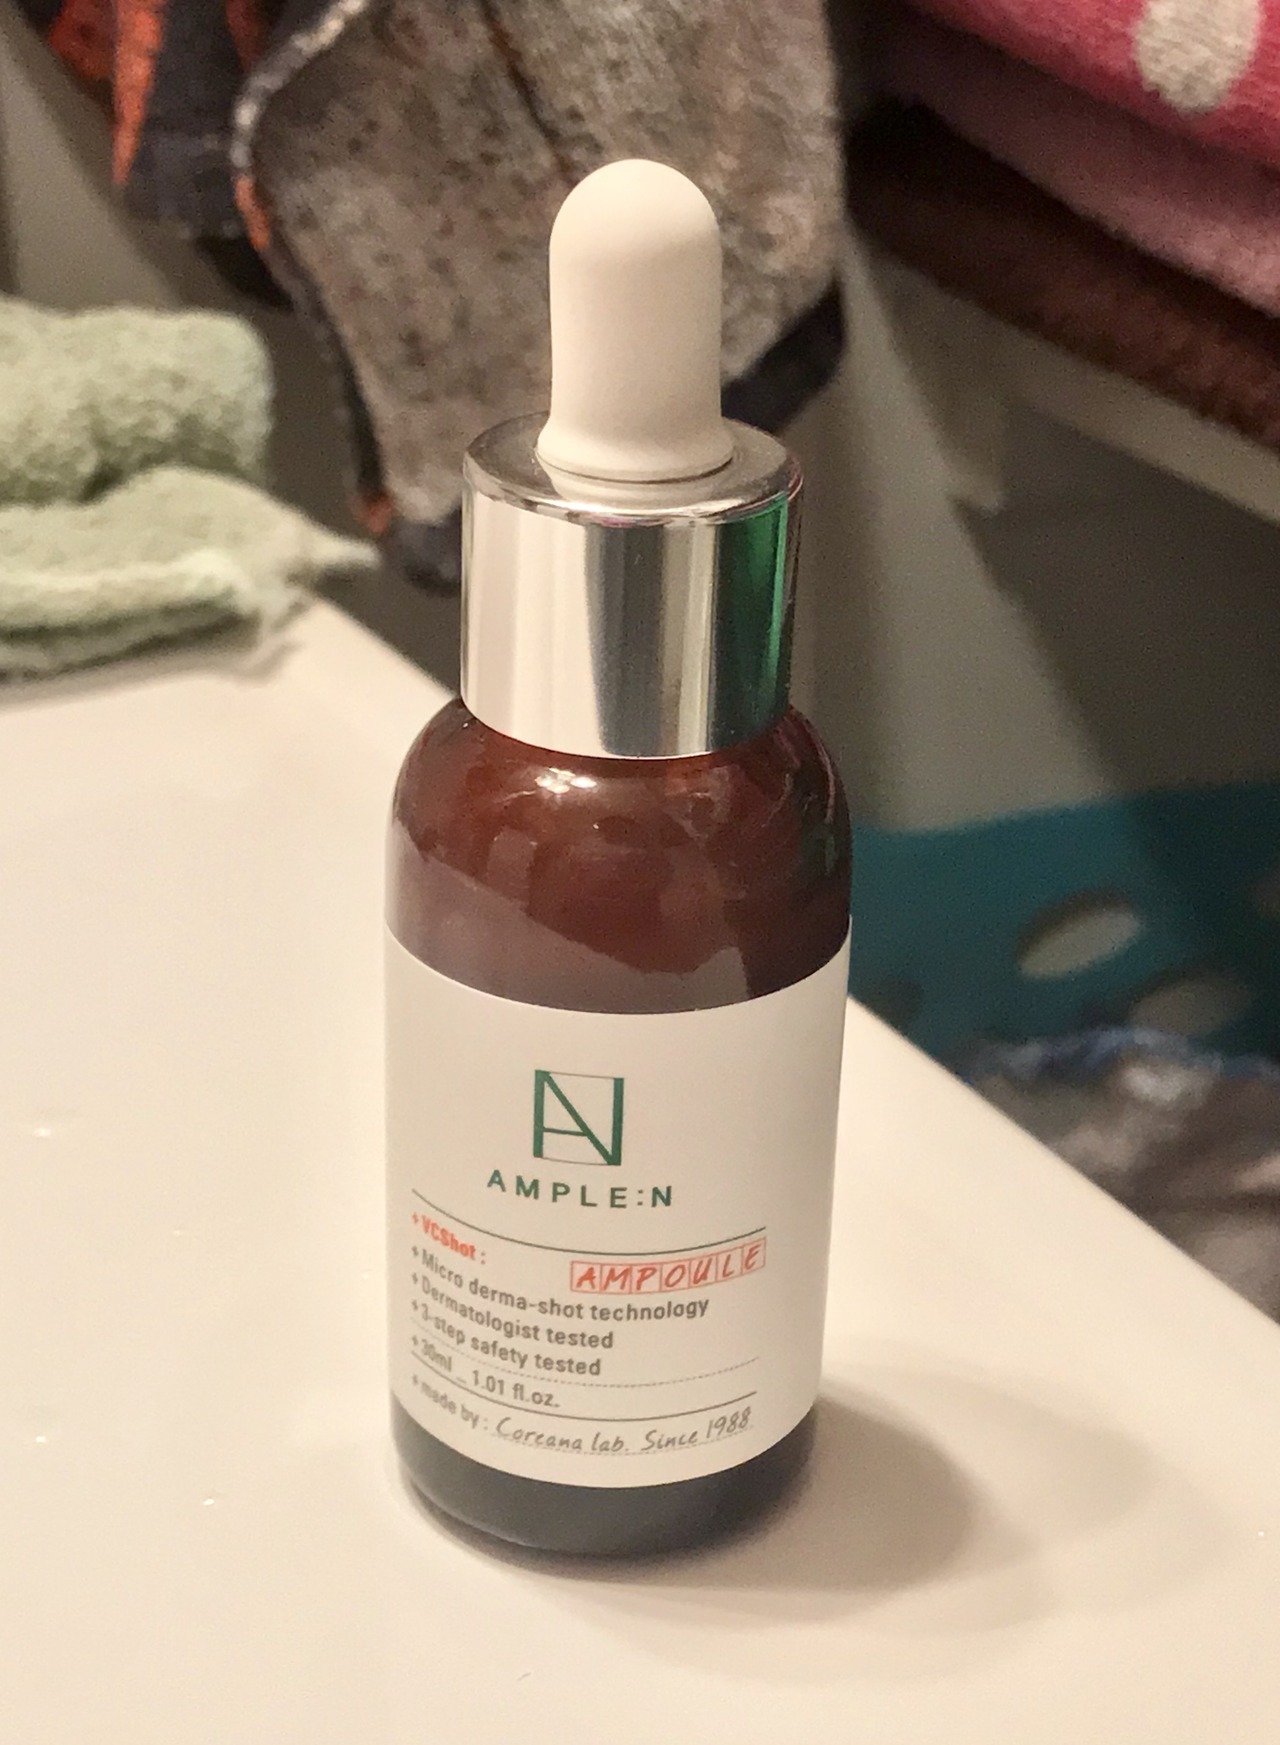 These are the things I like — Review of AMPLE:N's VC Shot Ampoule 